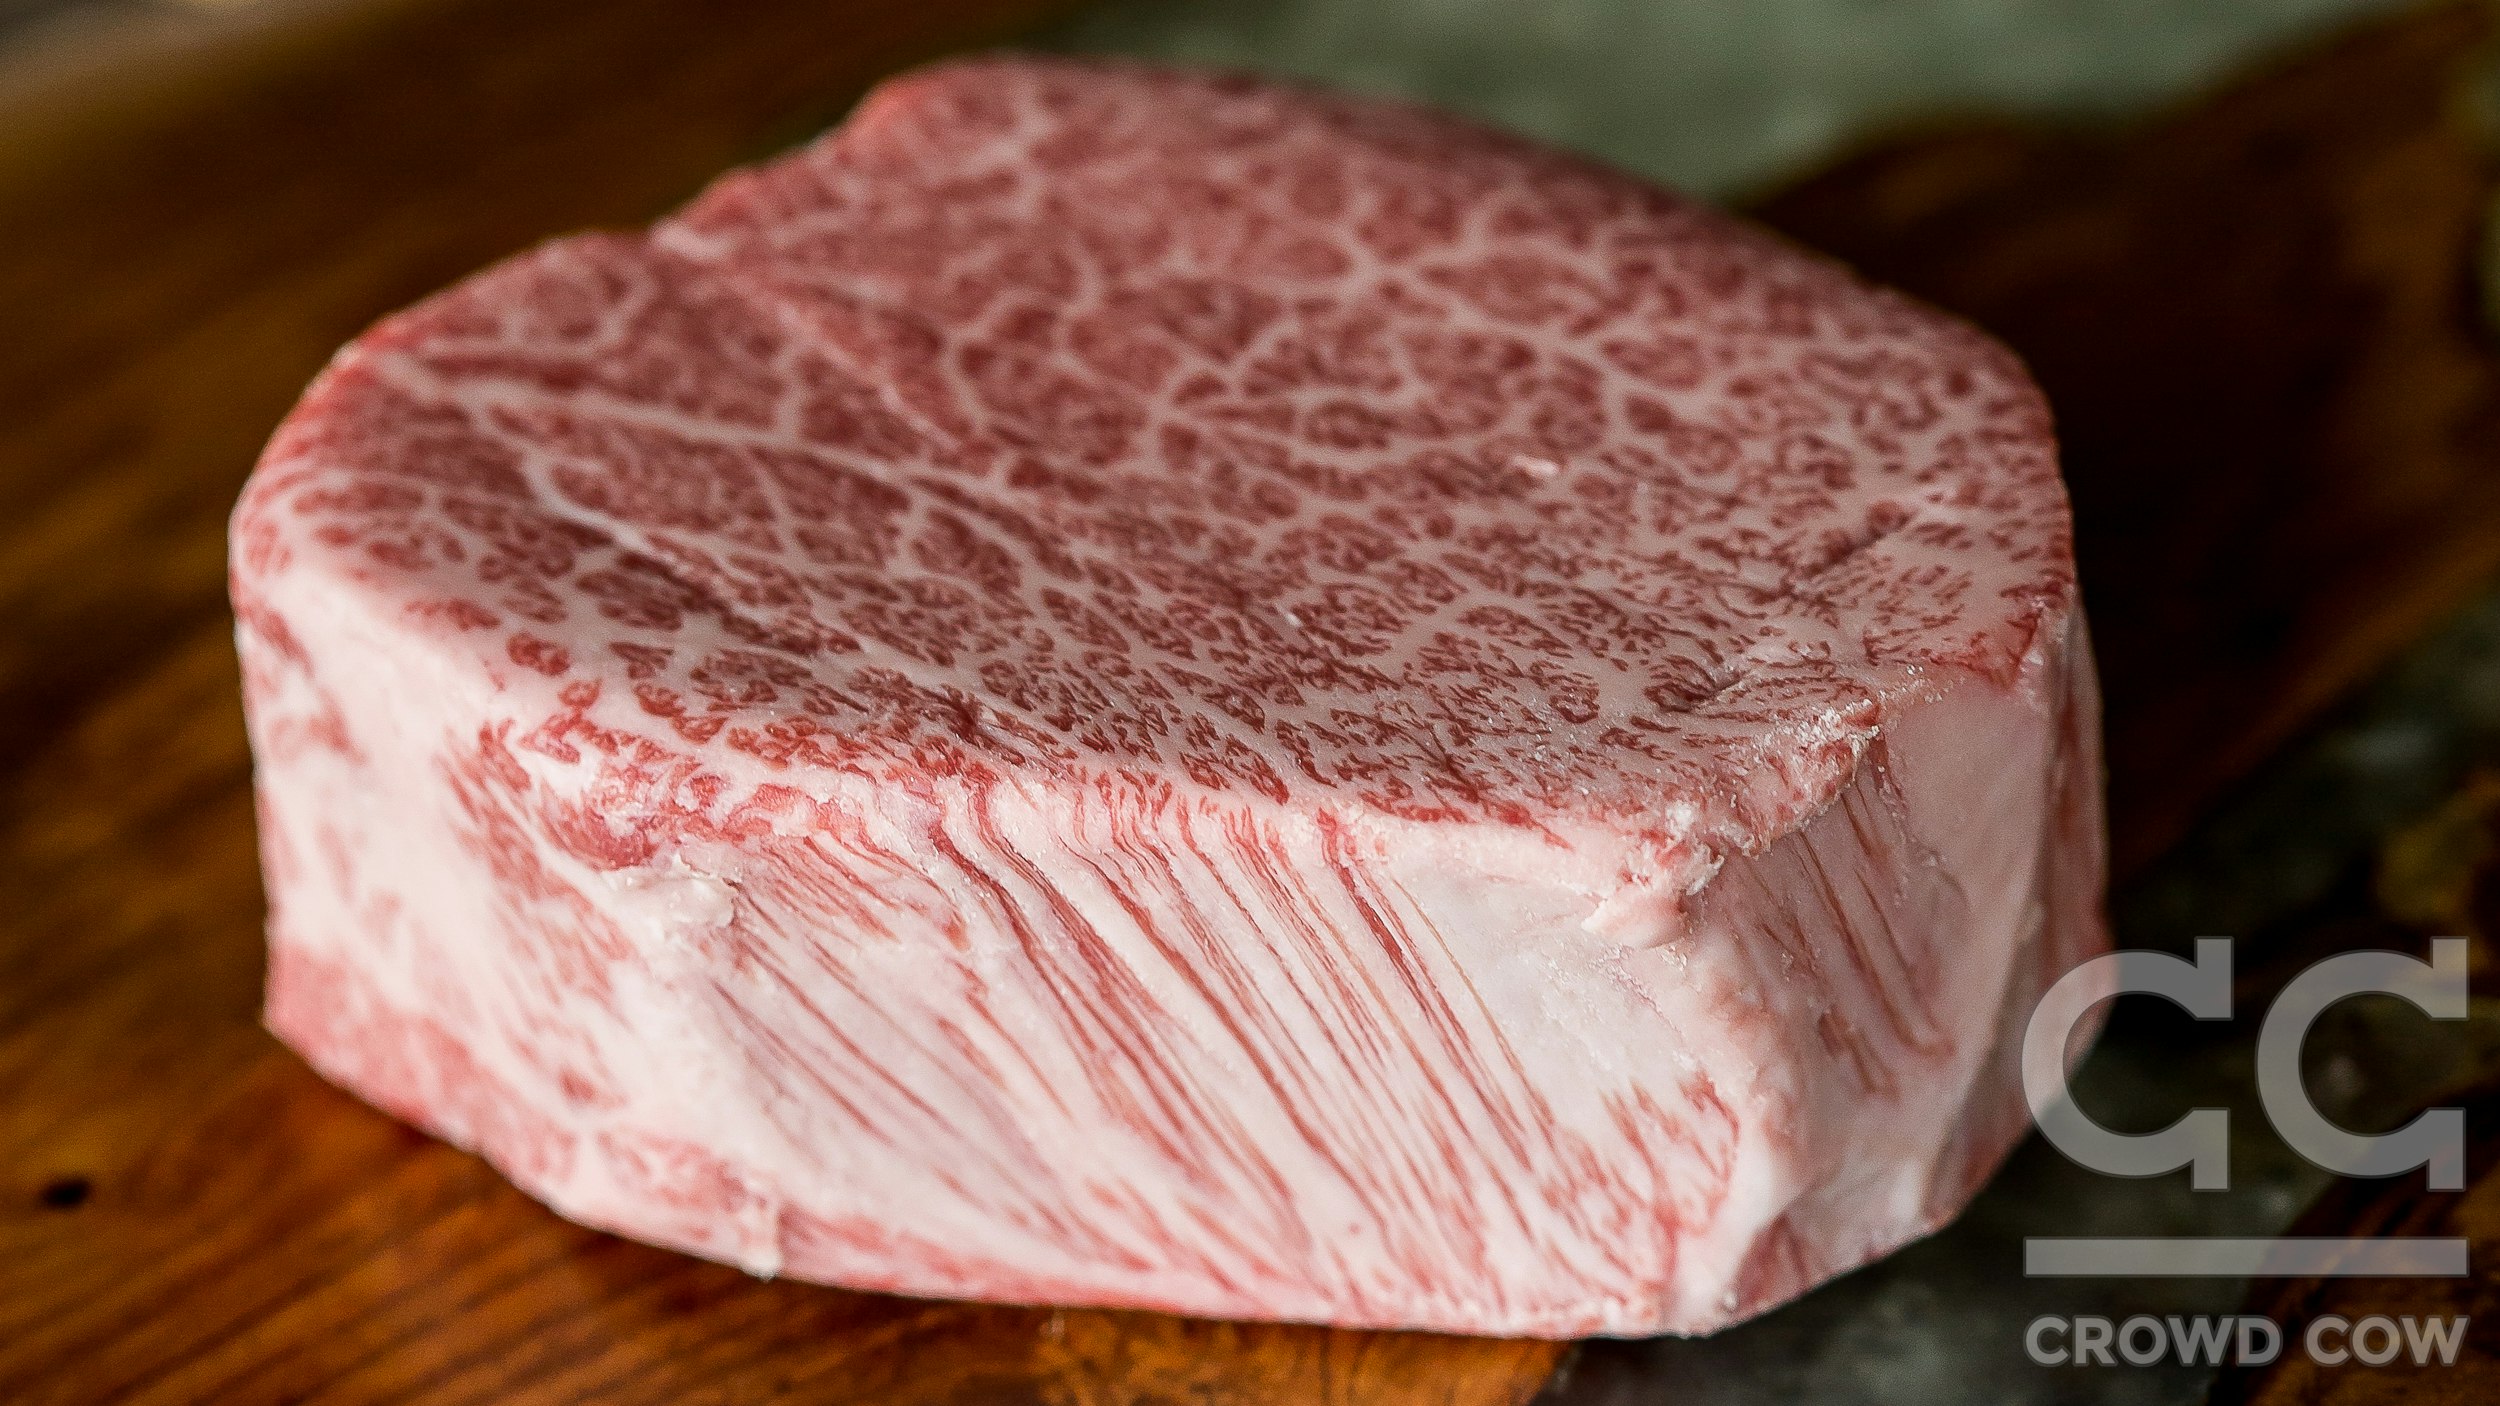 A5 Wagyu from Crowd Cow